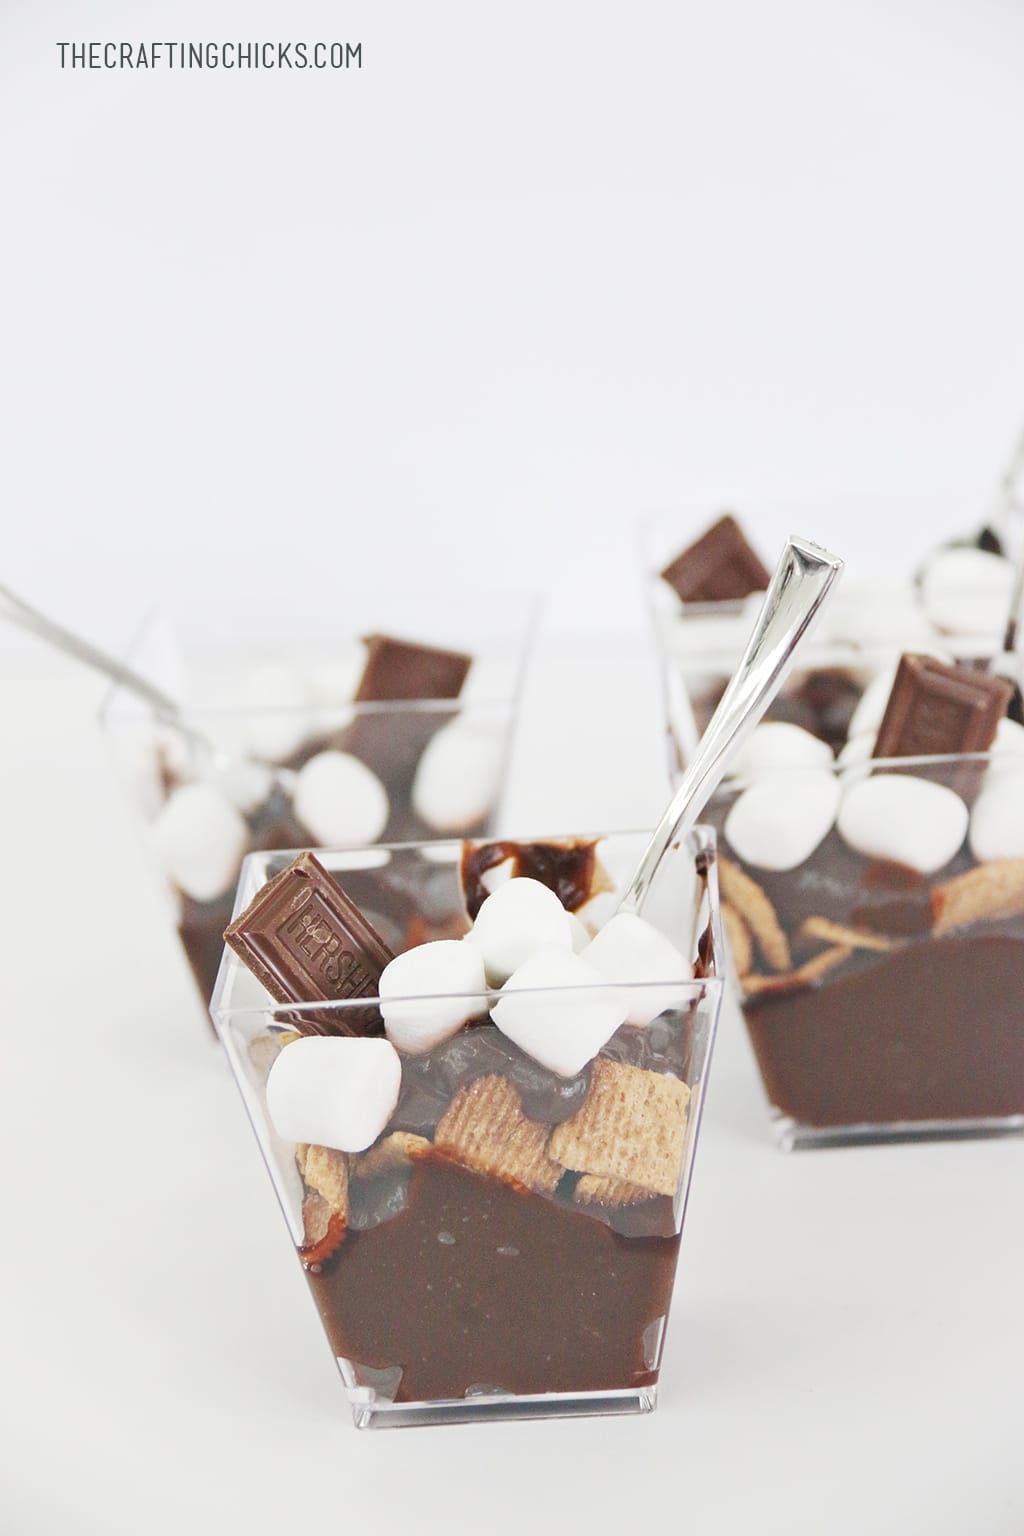 This S'more Parfait Recipe makes up a yummy treat. These are easy to throw together but look amazing! Try these for your next get together.